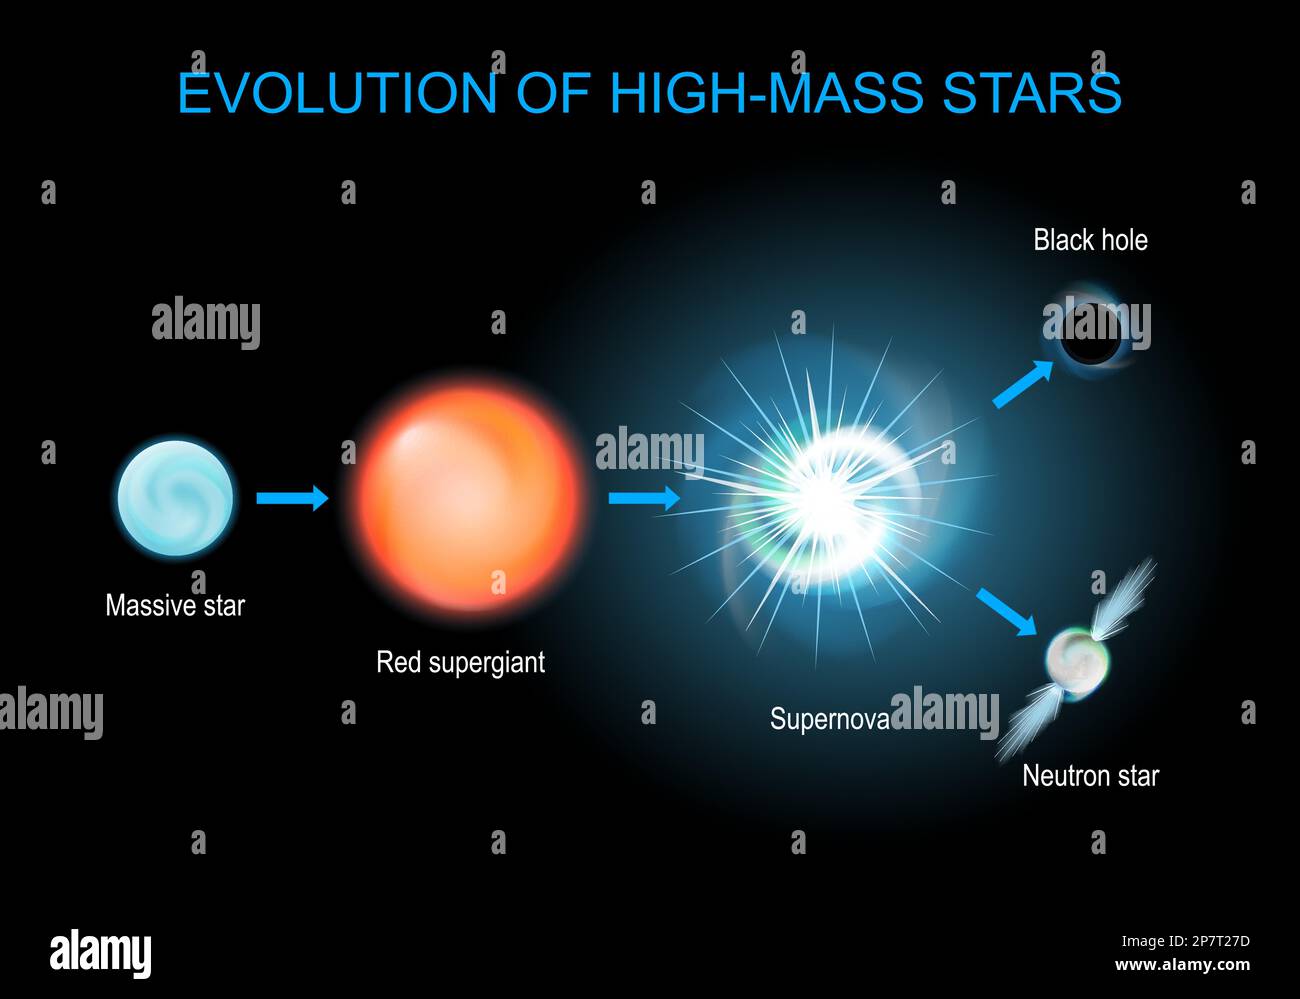 Stellar evolution. Life cycle of massive stars from red supergiant, and supernova, to black hole, and neutron star. Vector poster about astronomy. inf Stock Vector